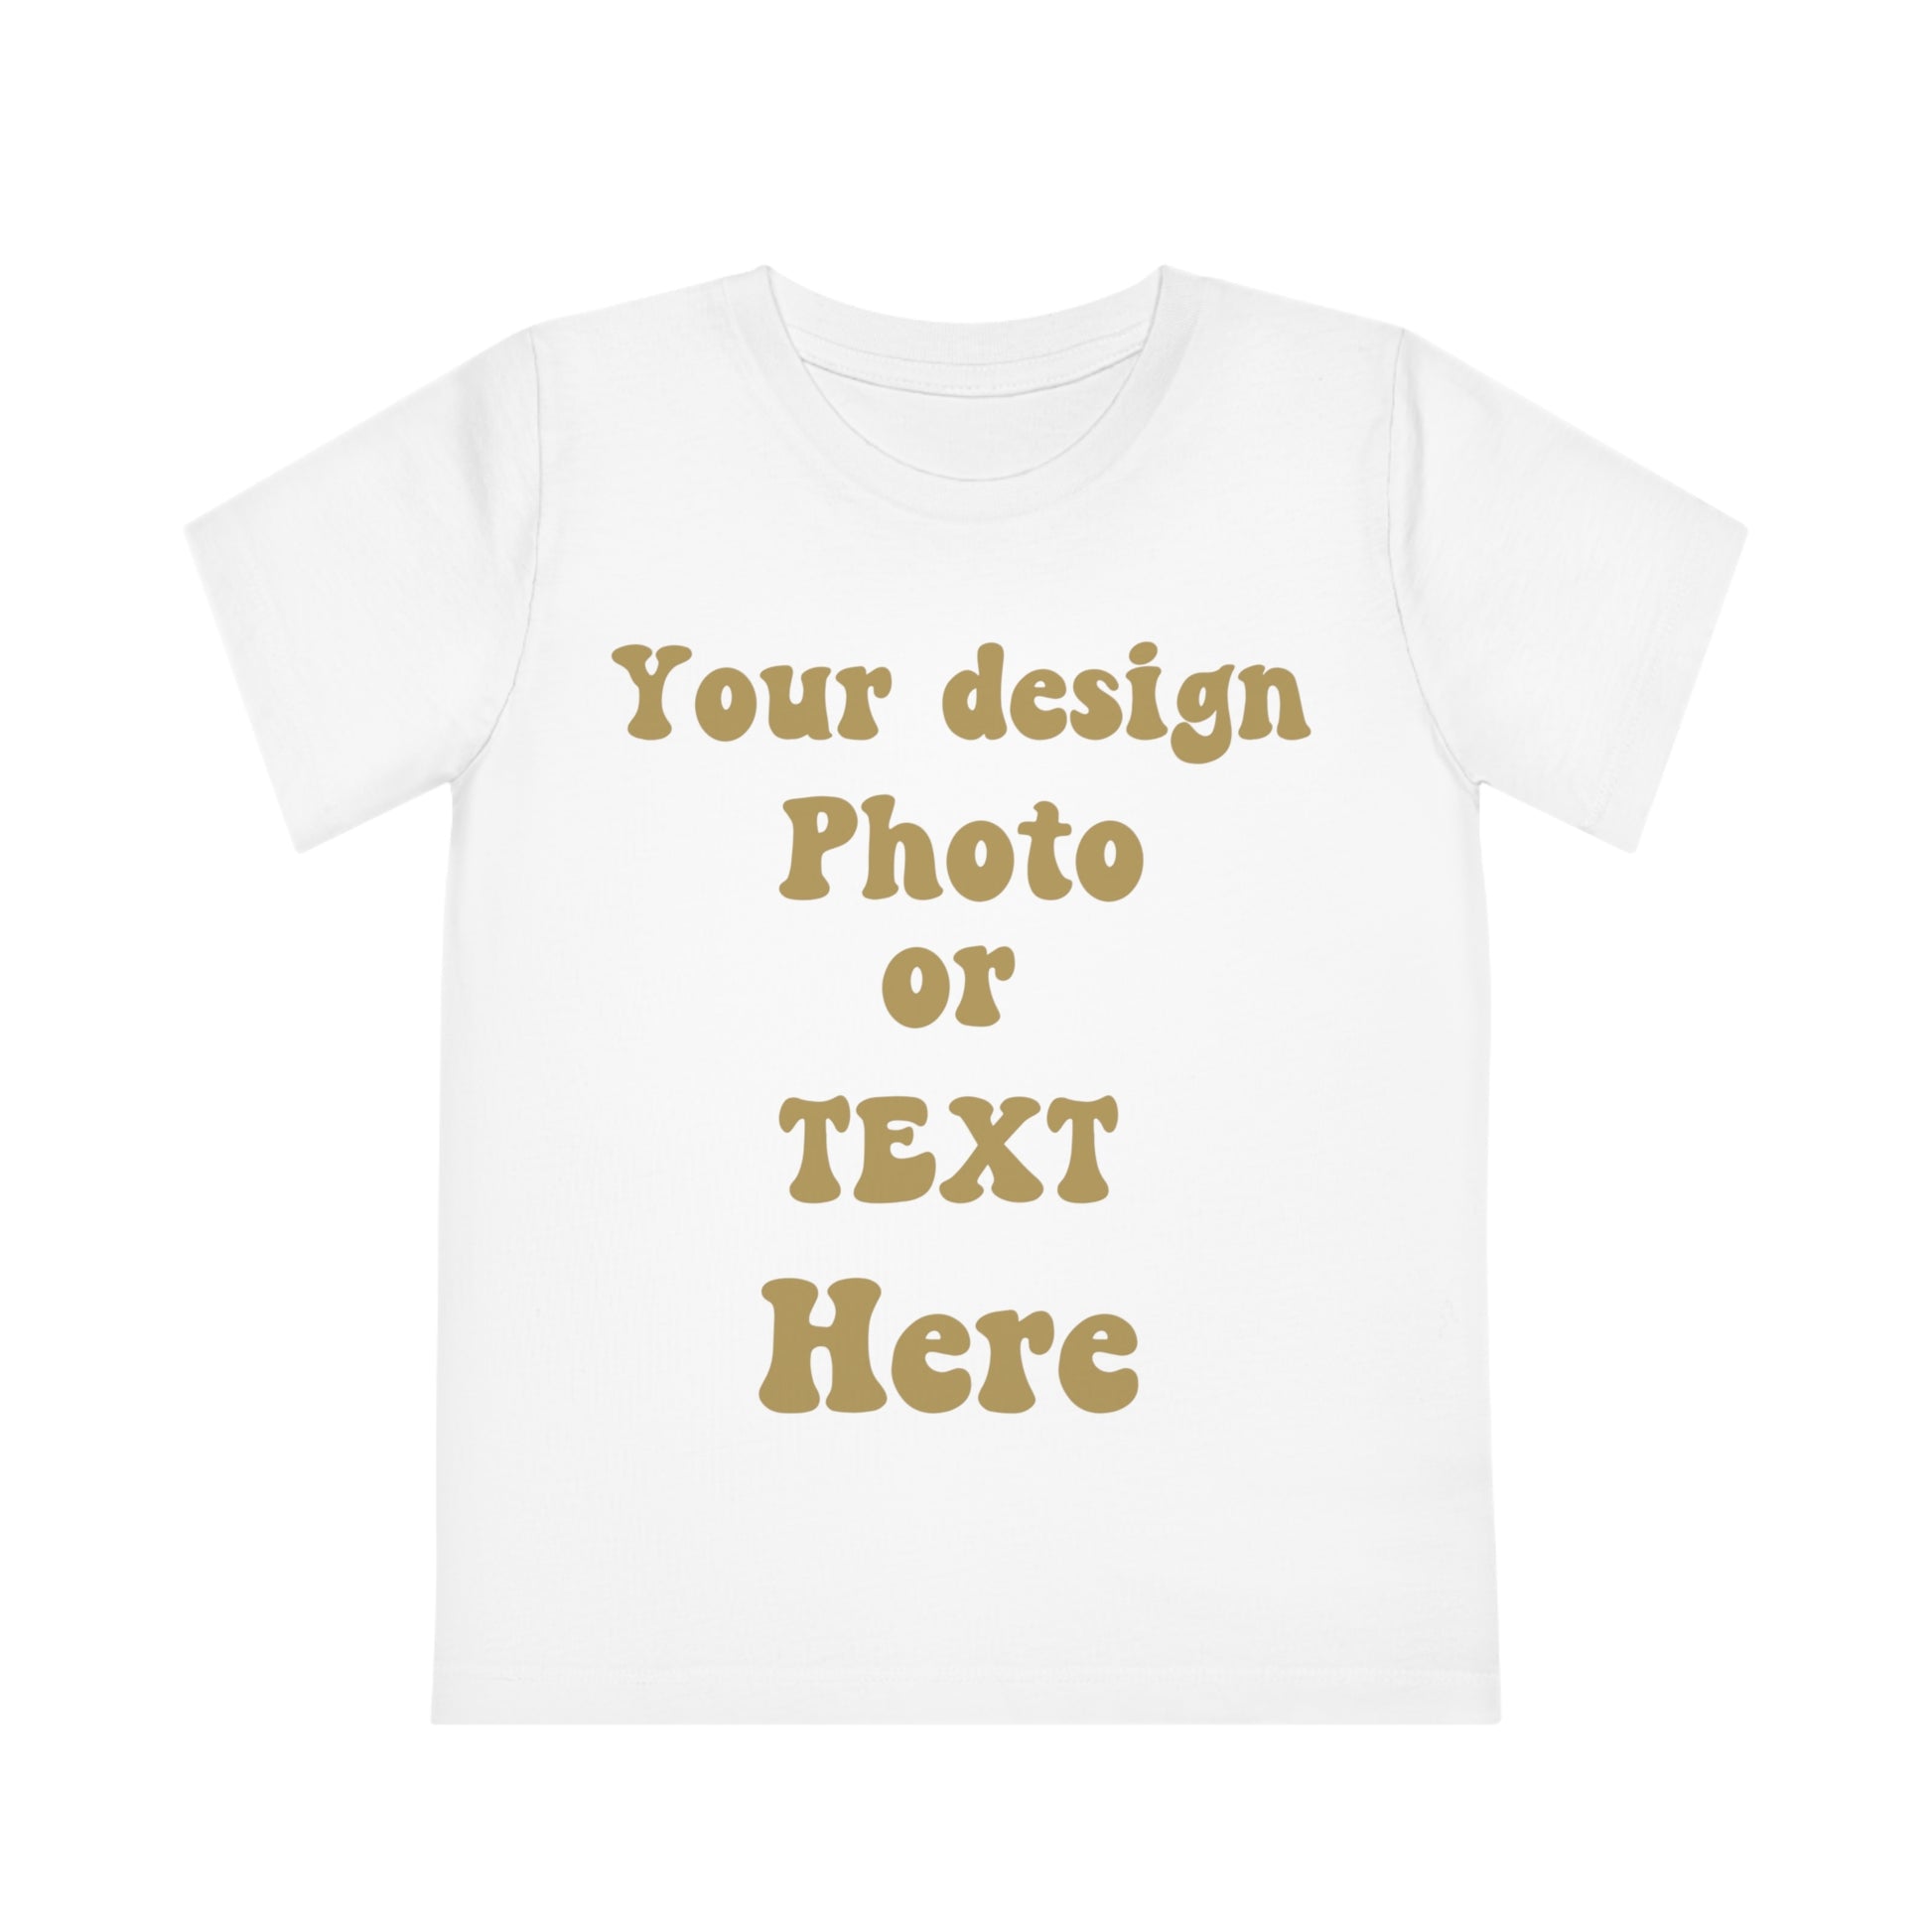 Kids' Personalized T-Shirt - Custom Children's Tee with Your Own Design Kids clothes White 3/4 Years 